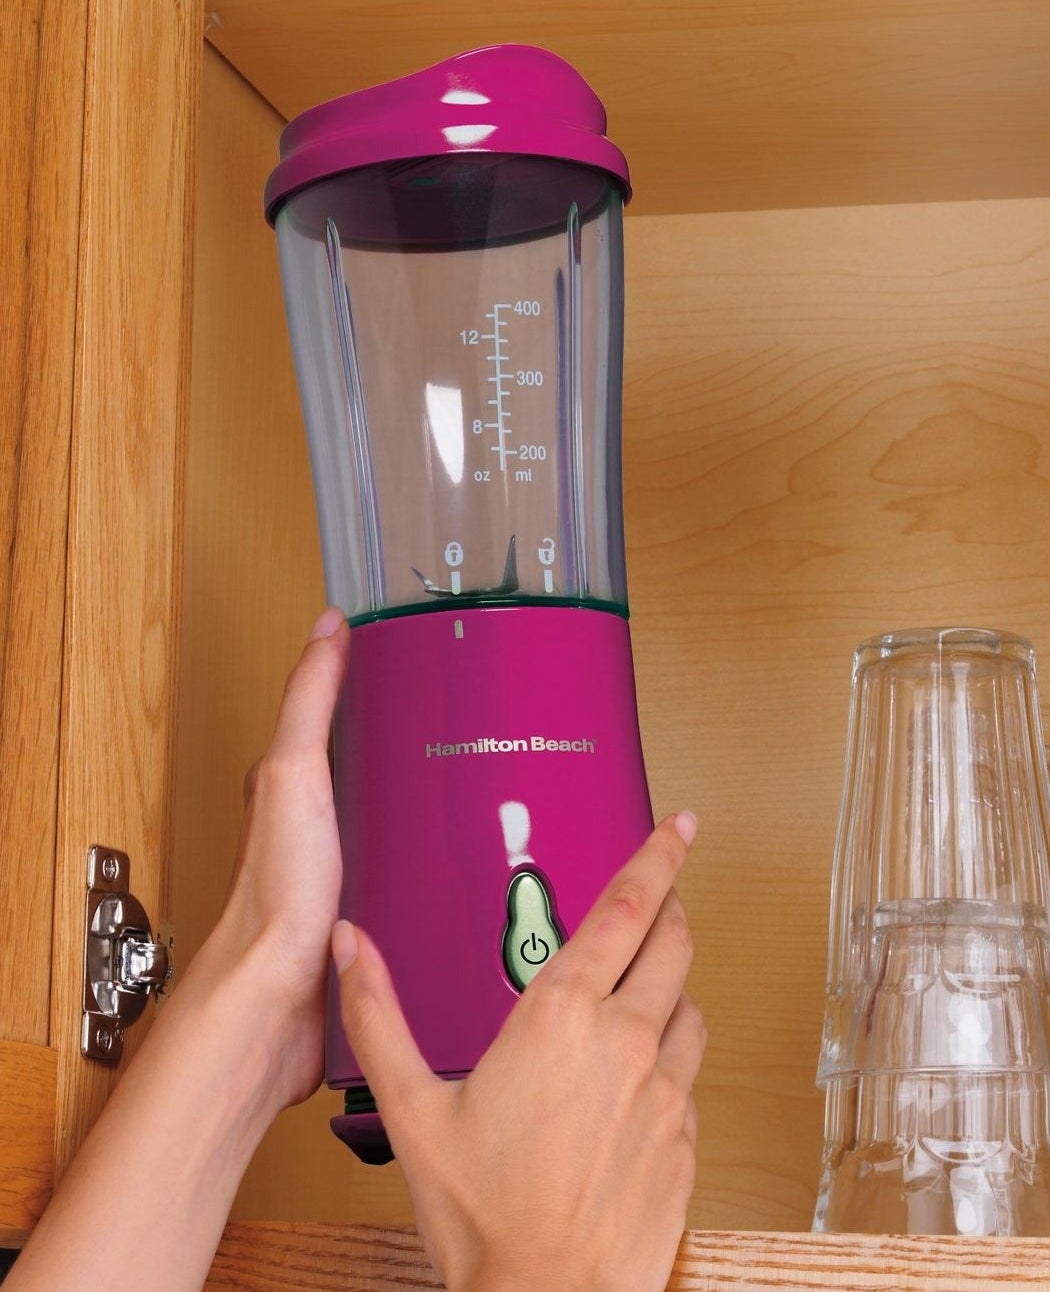 Model holding the personal blender in pink